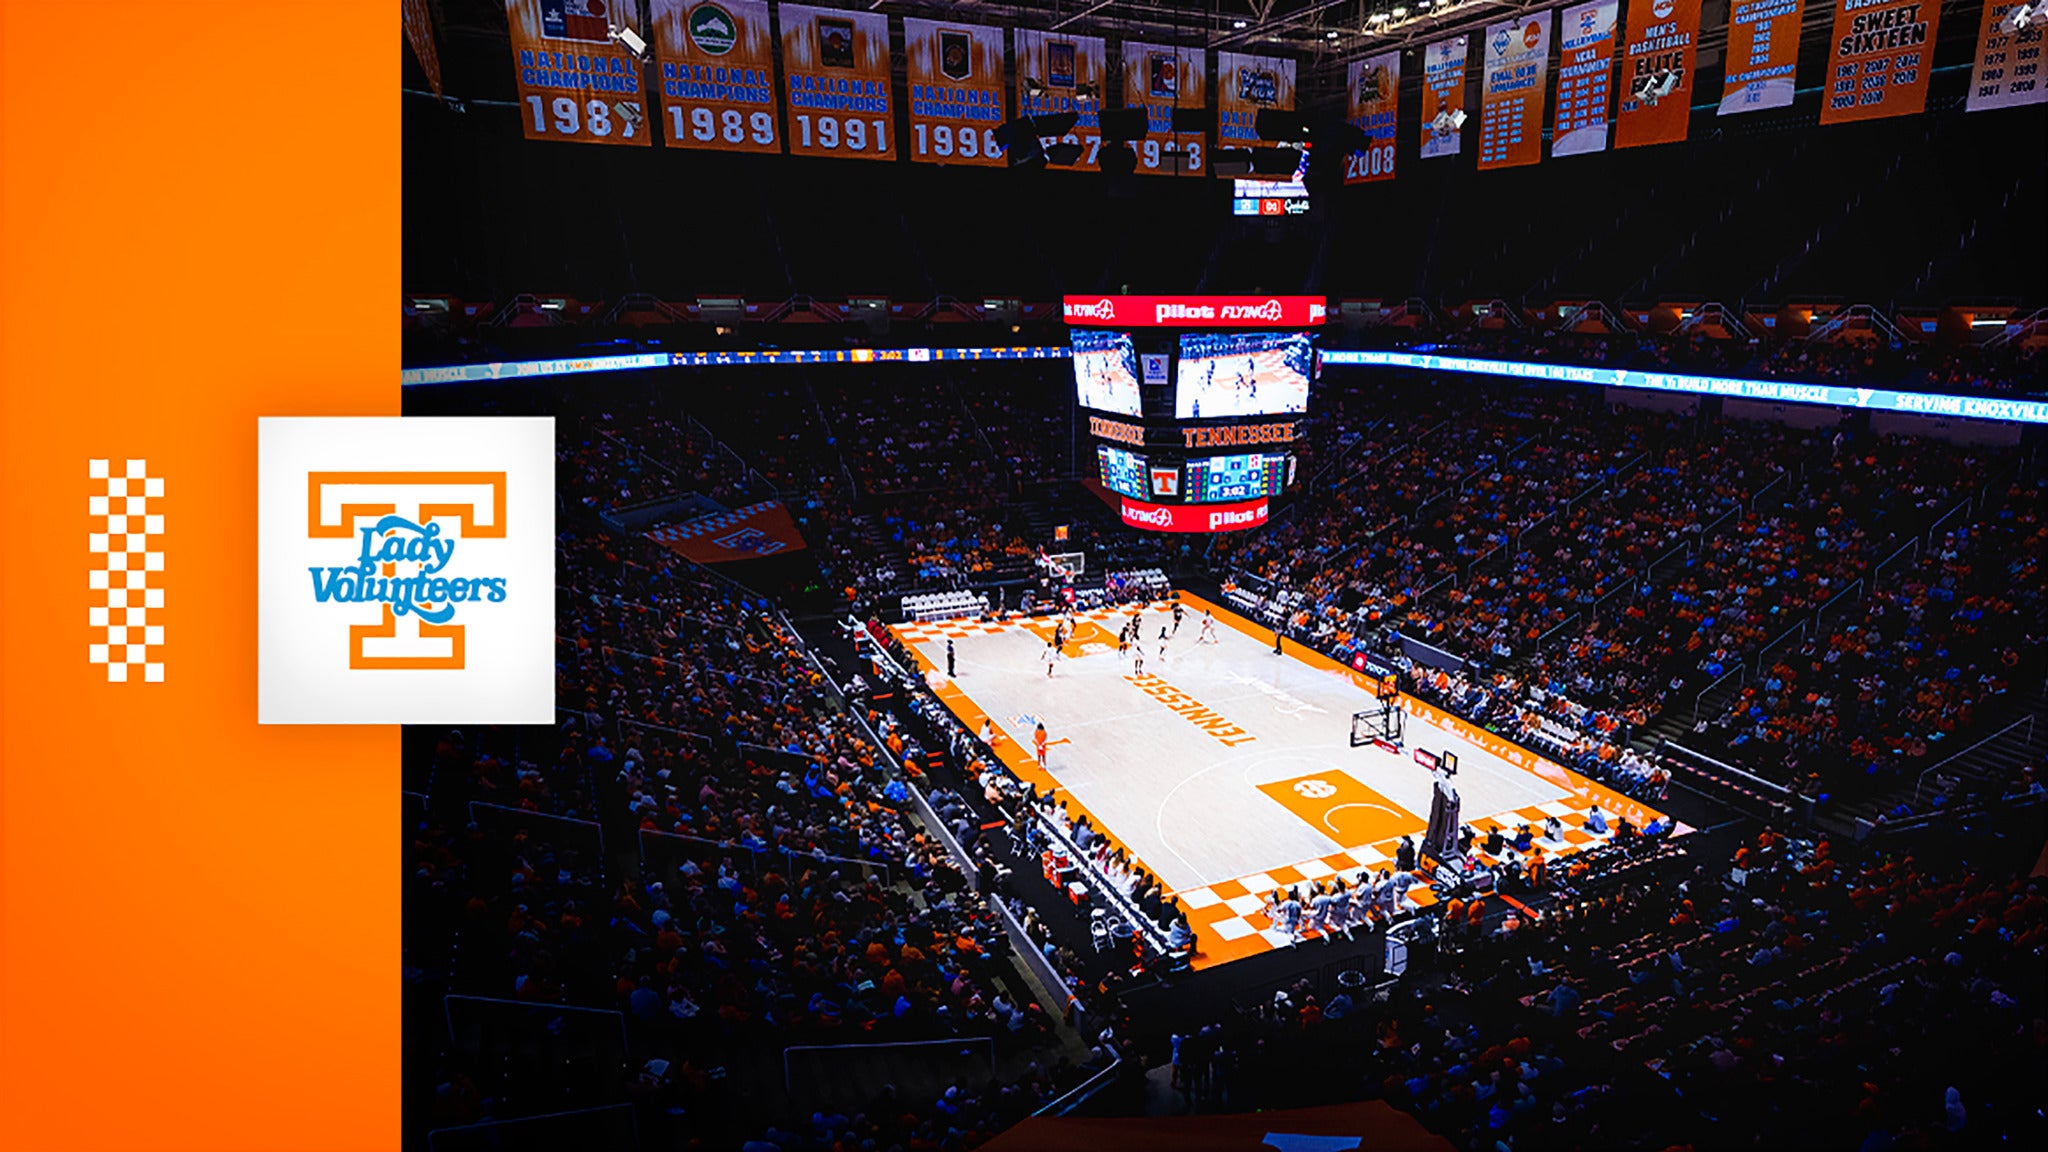 Tennessee Lady Volunteers Women's Basketball vs. Ole Miss Rebels Womens Basketball in Knoxville promo photo for Season presale offer code